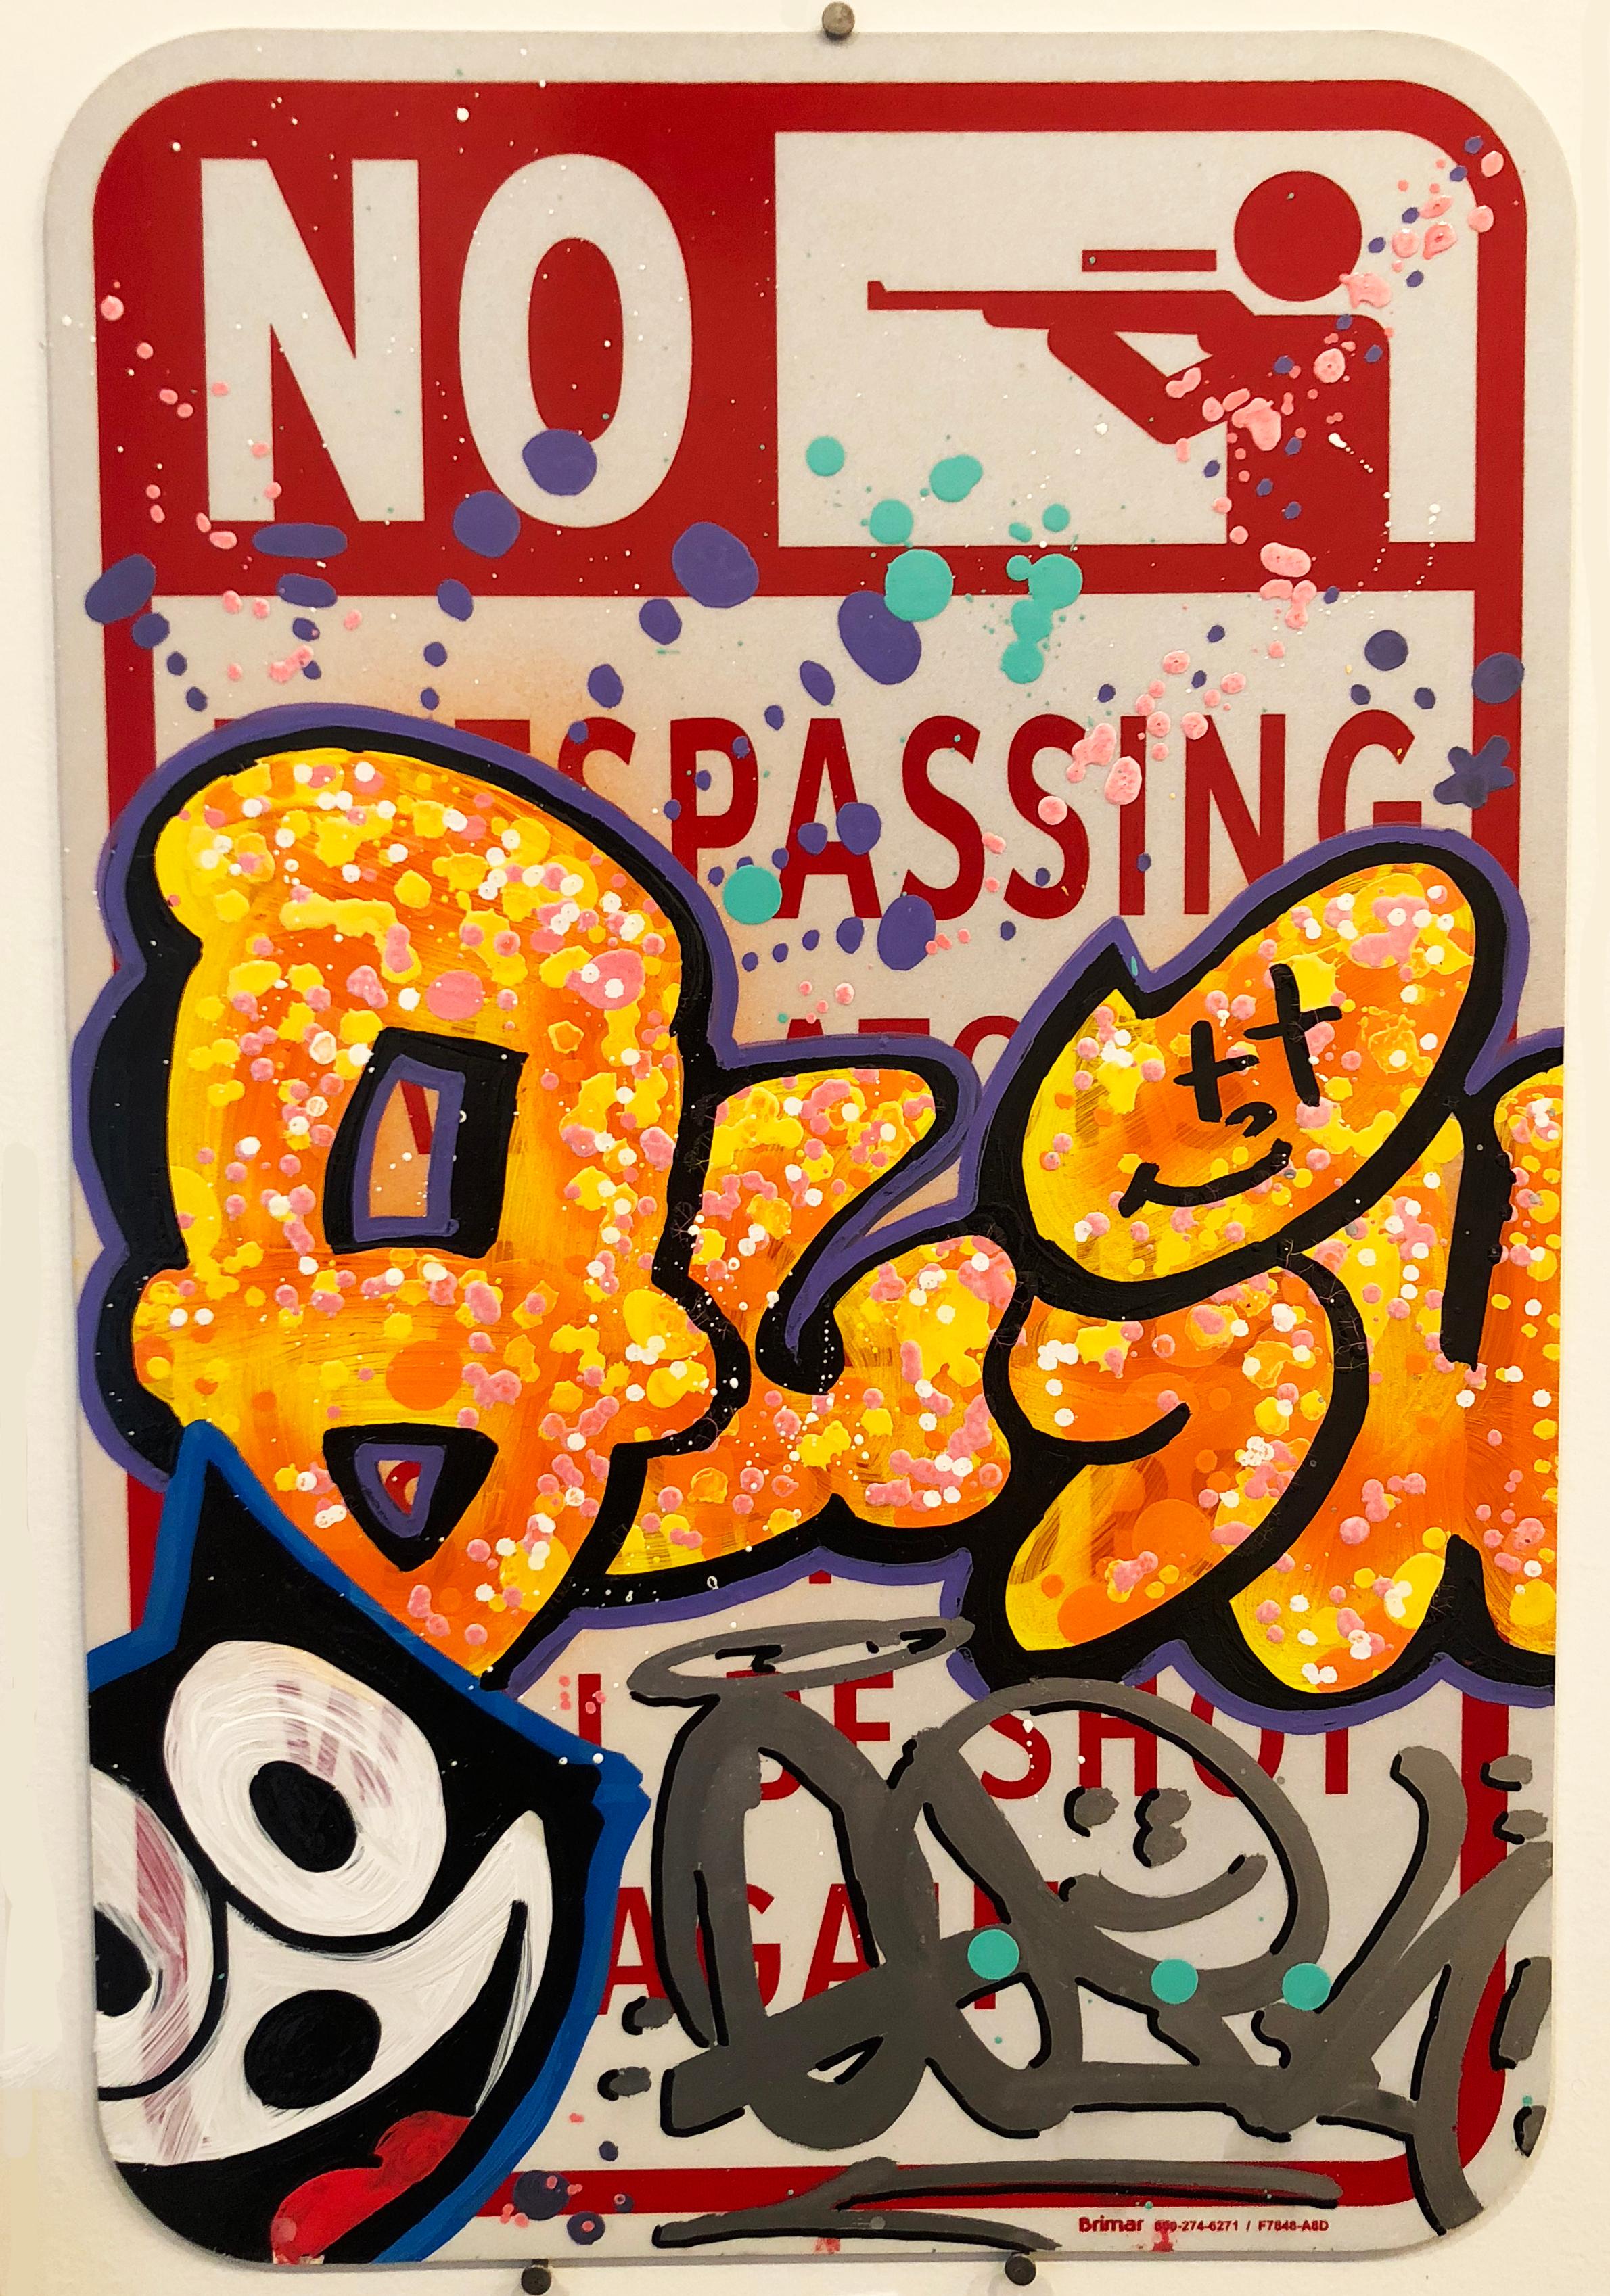 Quik's piece is acrylic and oil paint on an authentic street sign.

Growing up in Queens, NY, Lin Felton a.k.a. QUIK (American, b.1958) started tagging around his neighborhood during the 1970s. By the 1980s, he was one of the few New York Graffiti